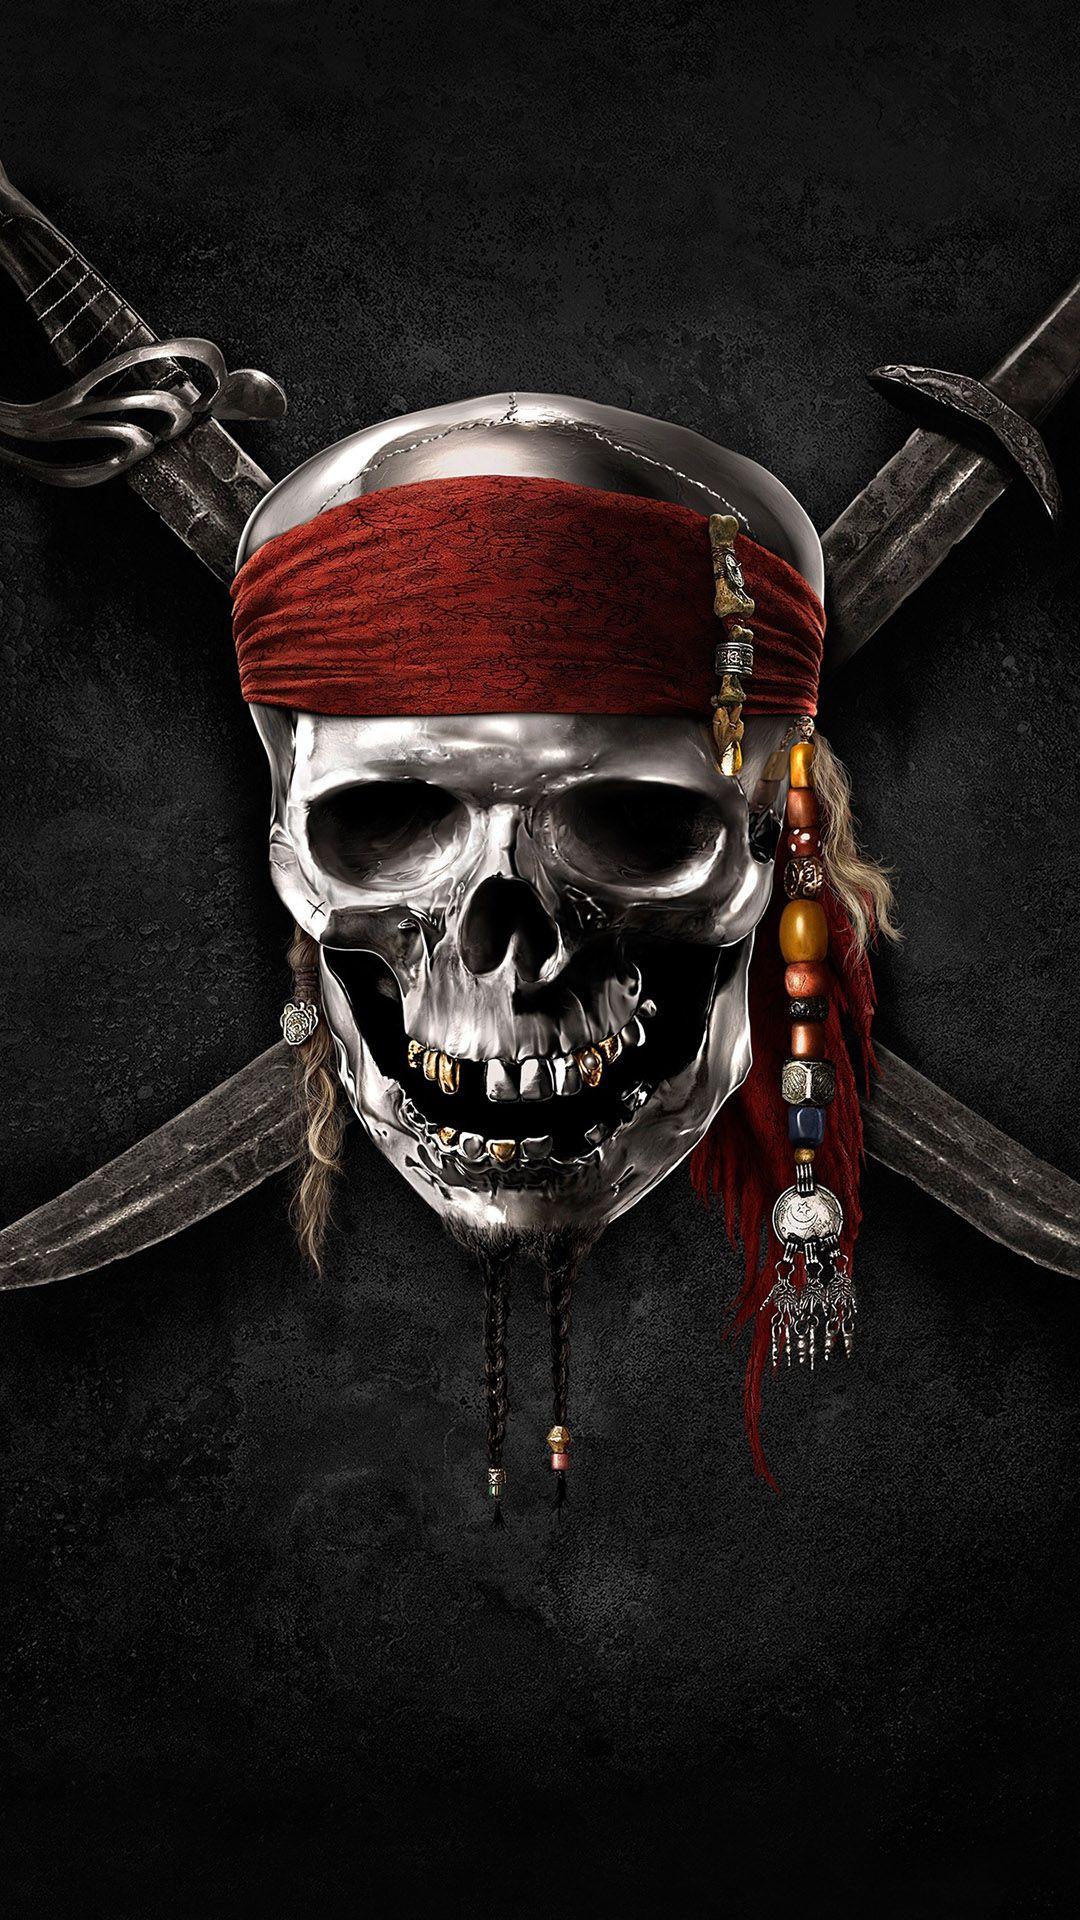 Mobile Black Pirates HD Android Wallpaper for Mobile